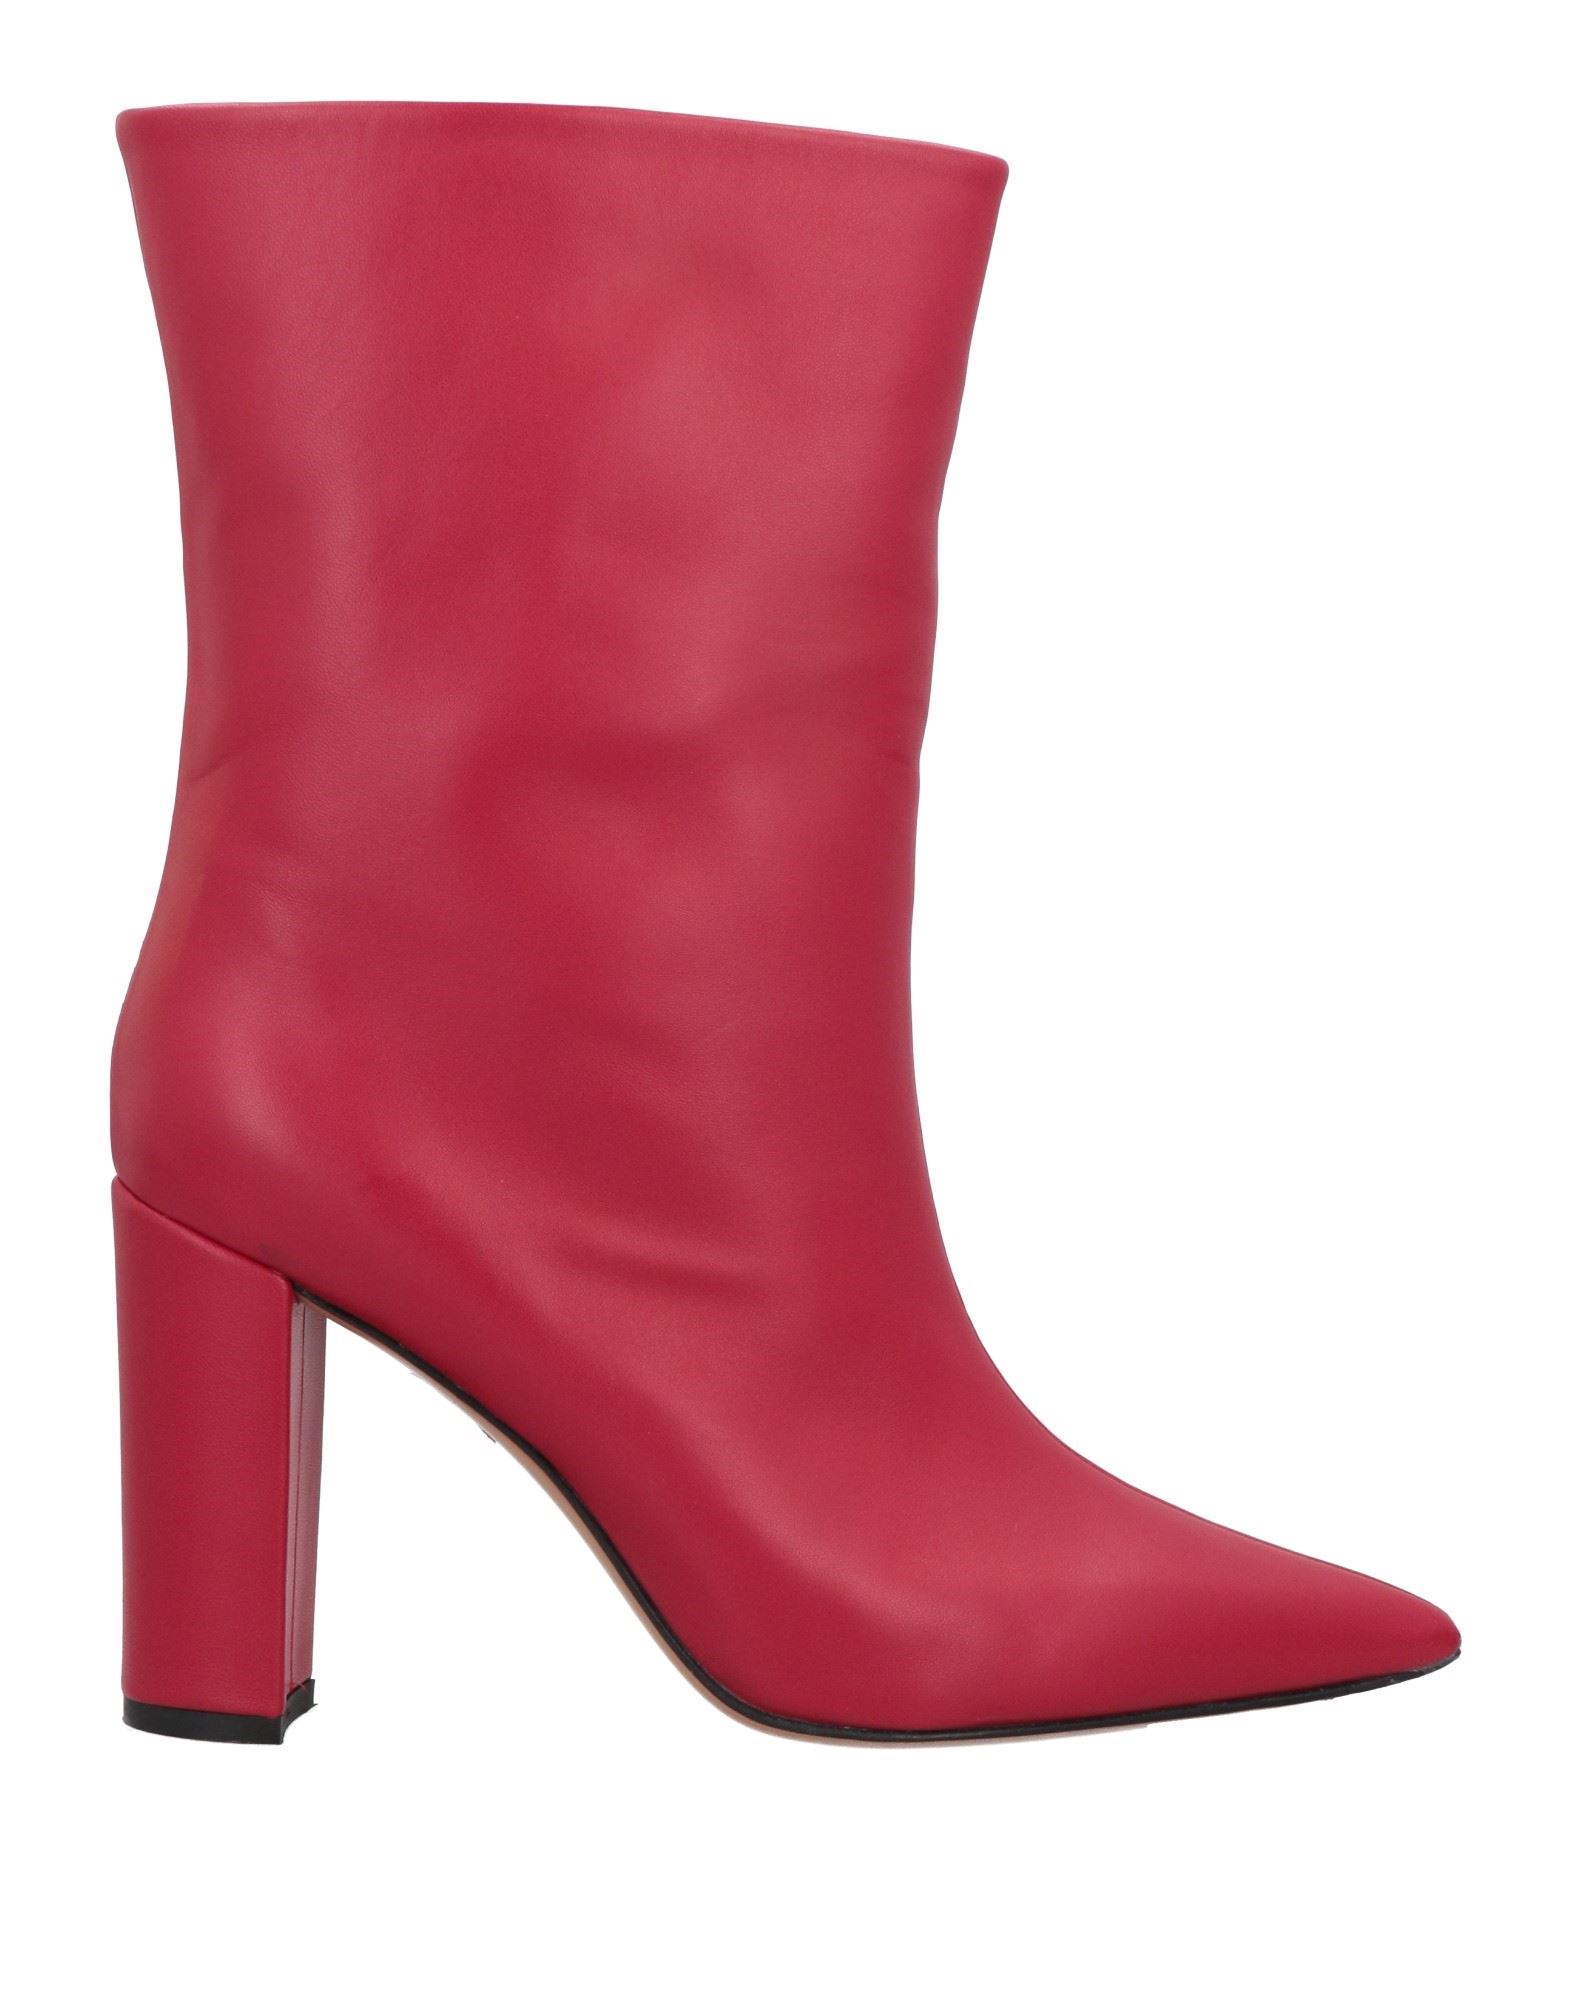 Alchimia Napoli Ankle Boots In Red